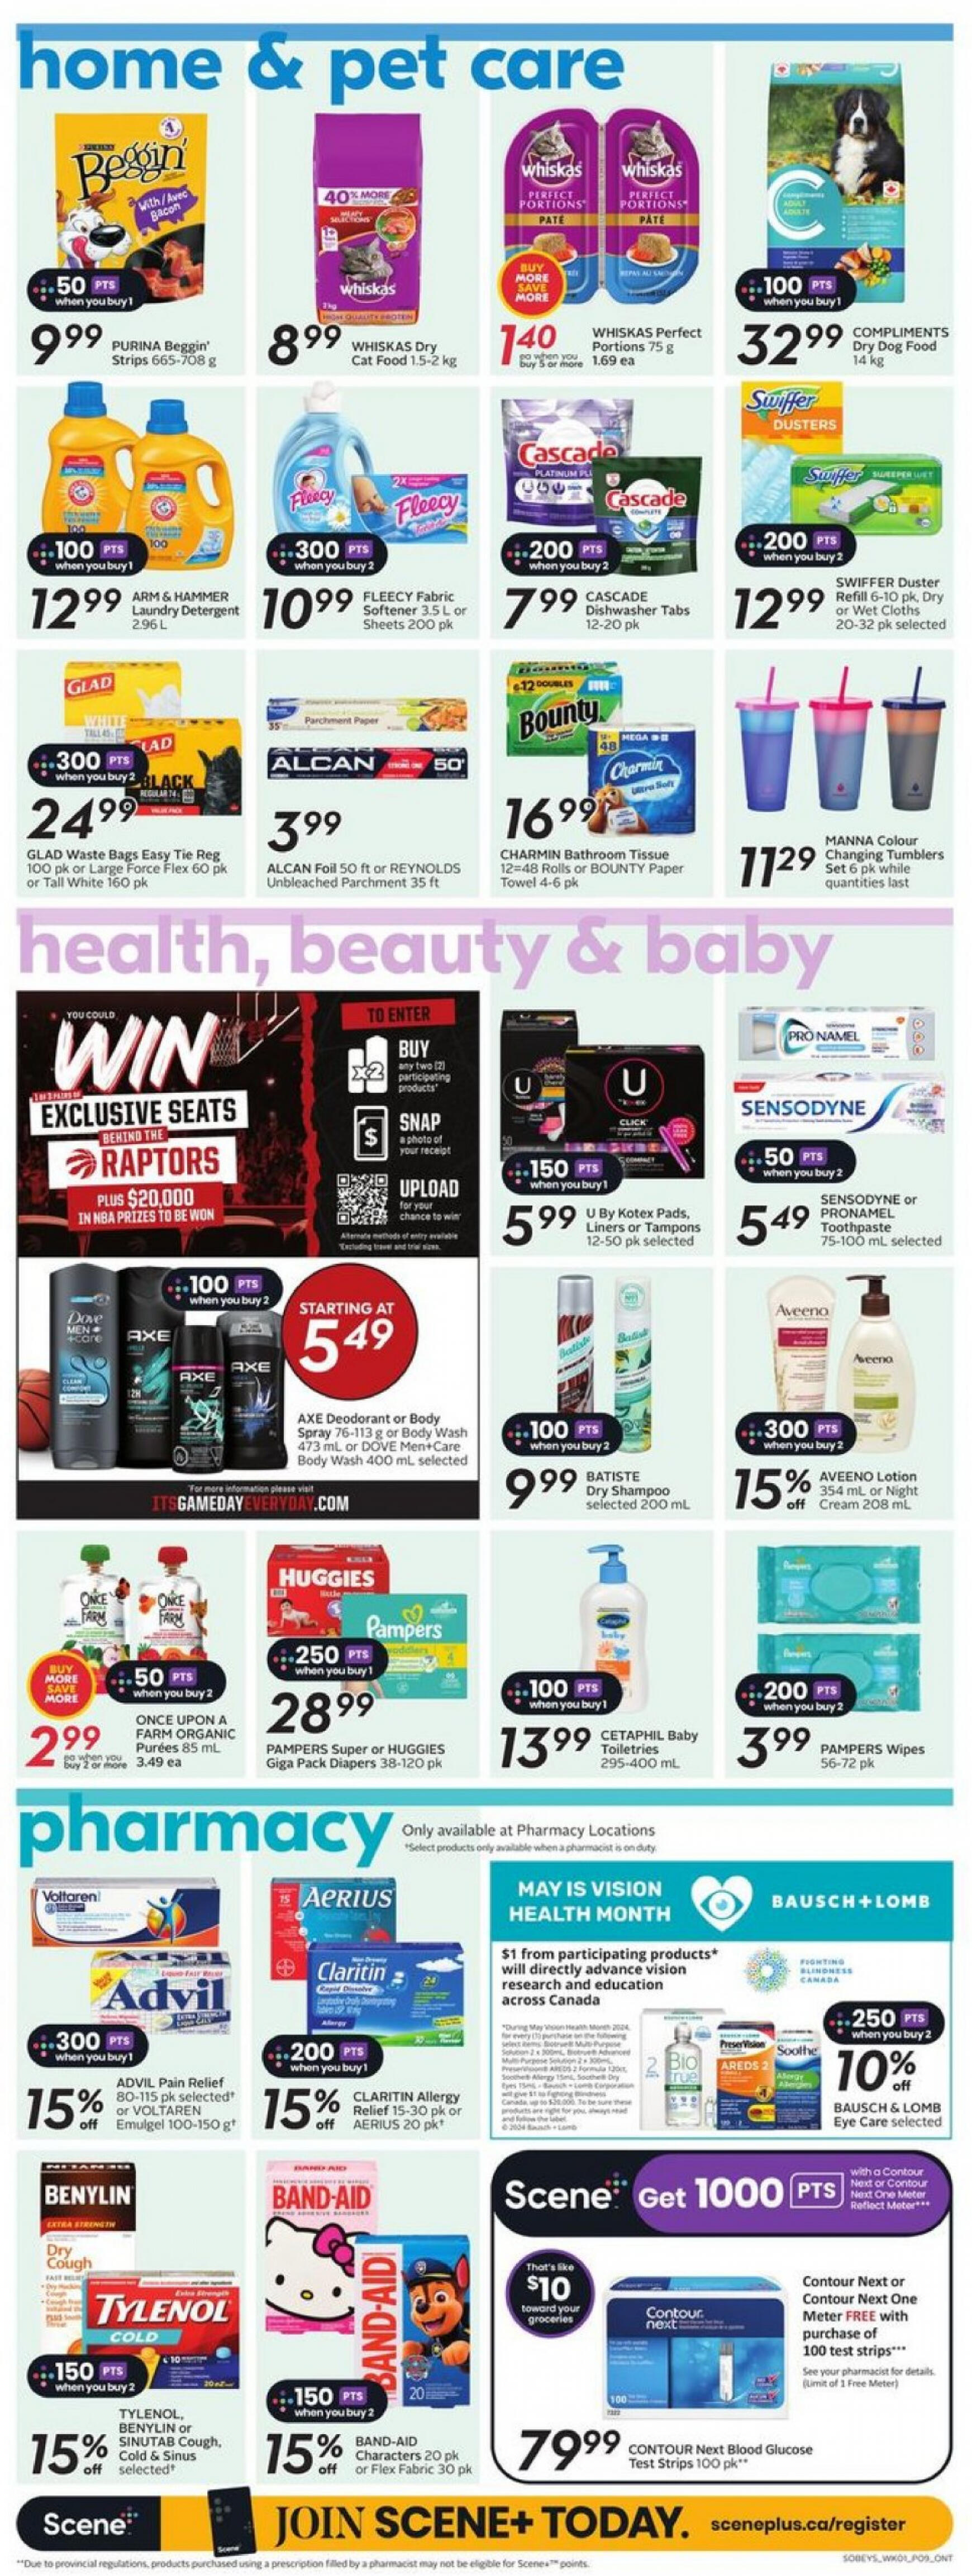 sobeys - Sobeys - Weekly Flyer - Ontario flyer current 02.05. - 08.05. - page: 16